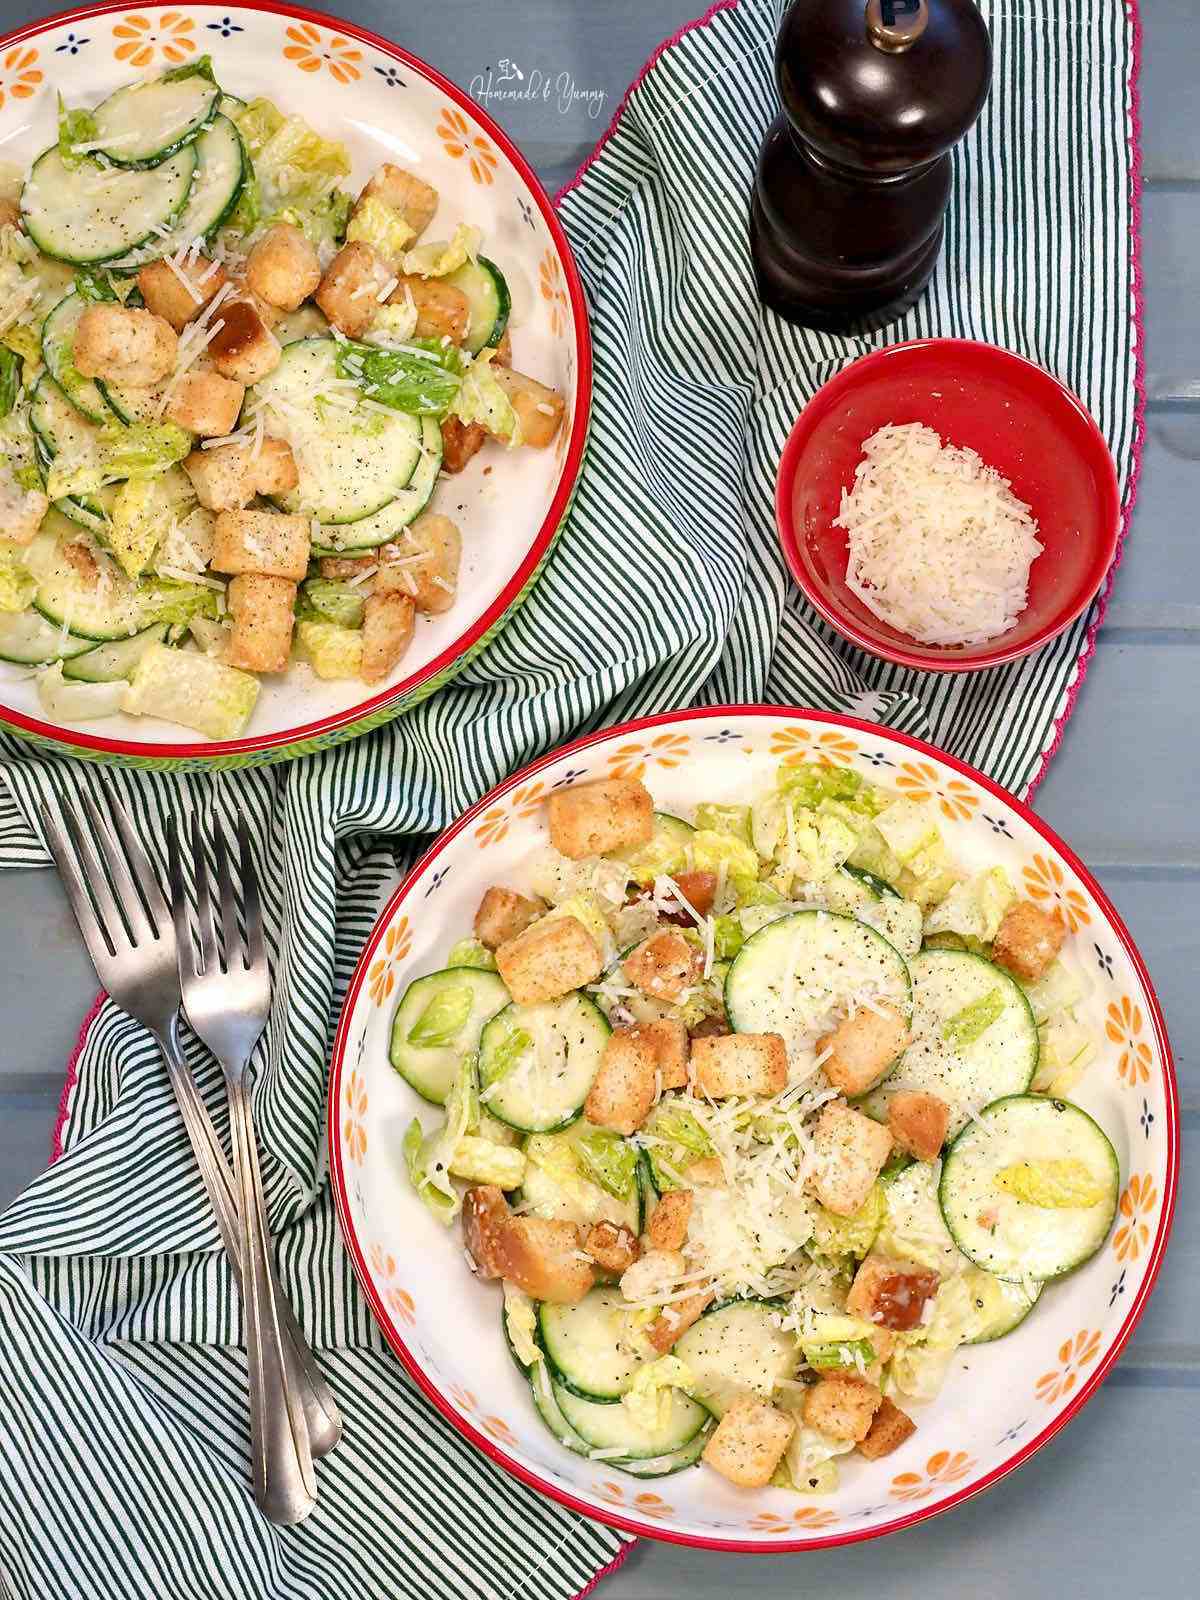 A bowl of Zucchini Caesar Salad for lunch.